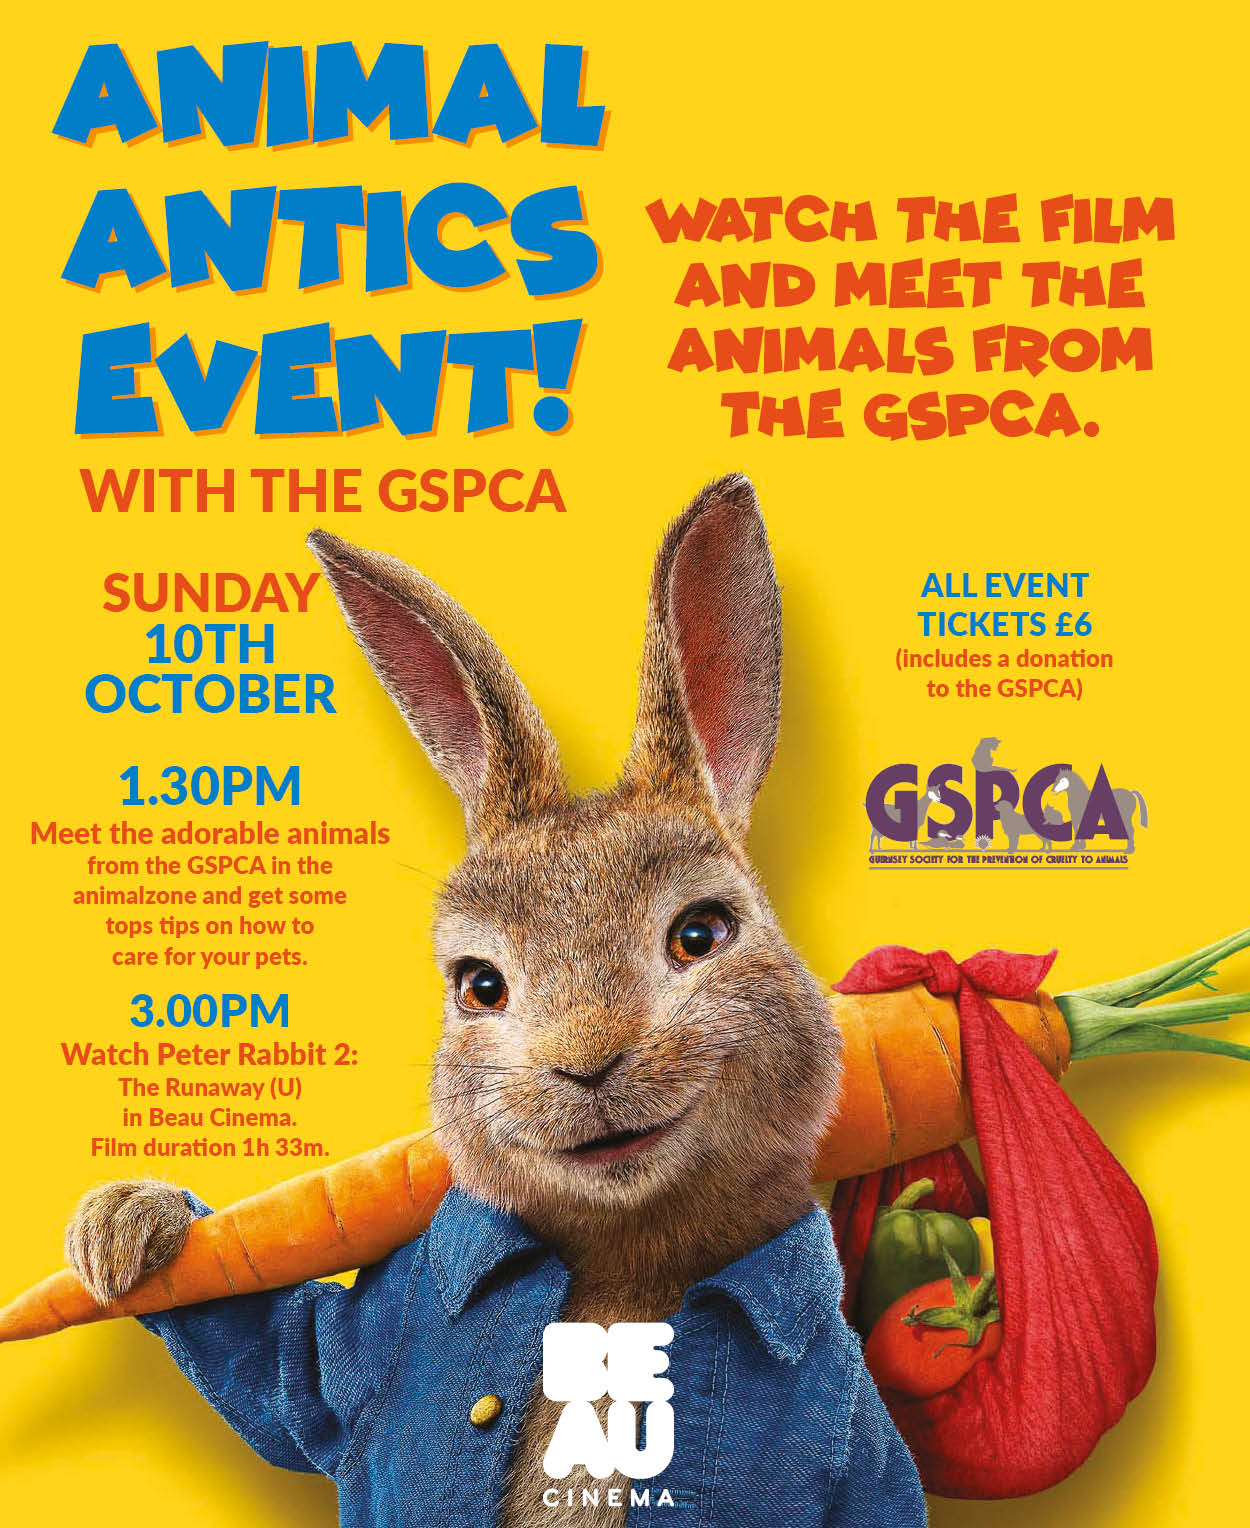 Peter Rabbit 2 and Animal Antics Event with the GSPCA - Guernsey with Kids